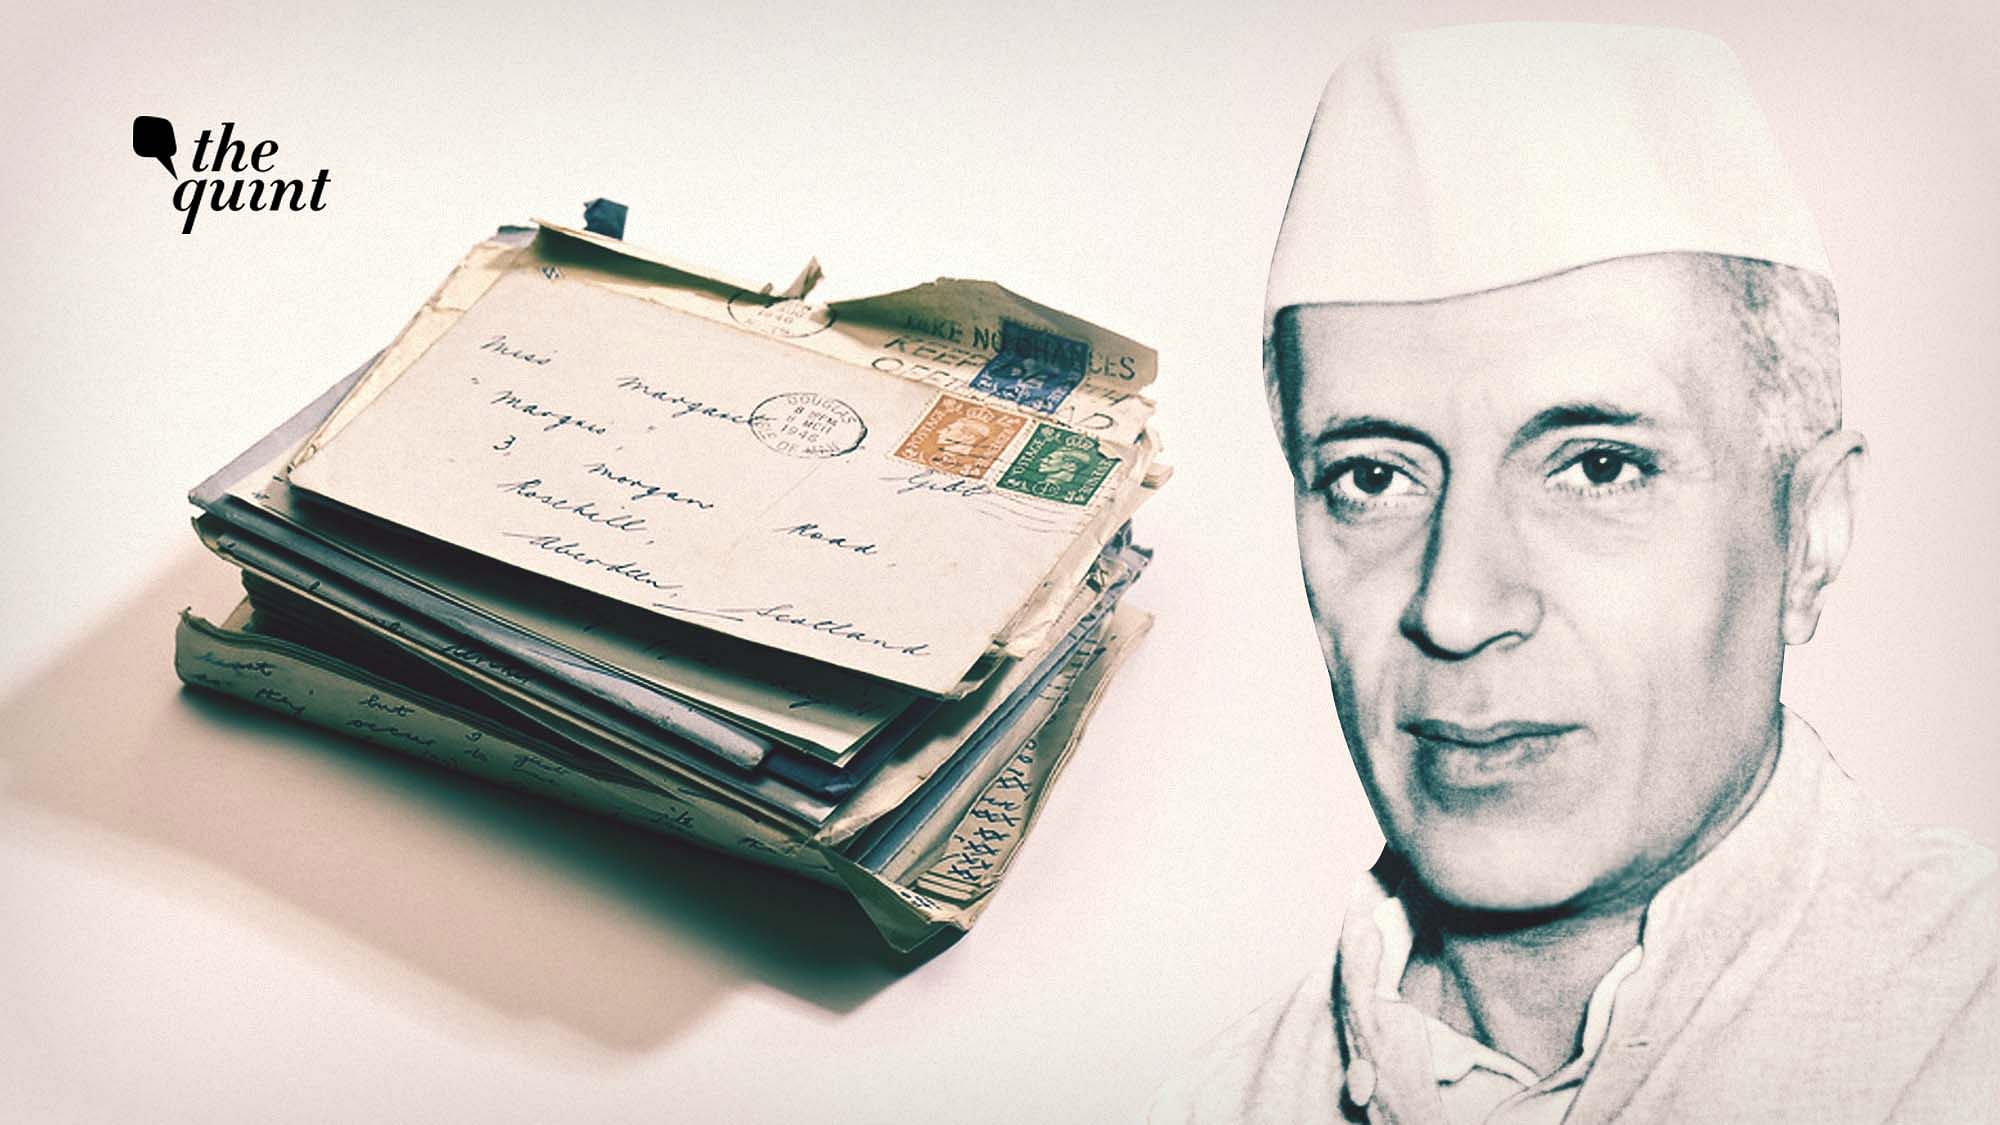 Image of Nehru and letters used for representational purposes.